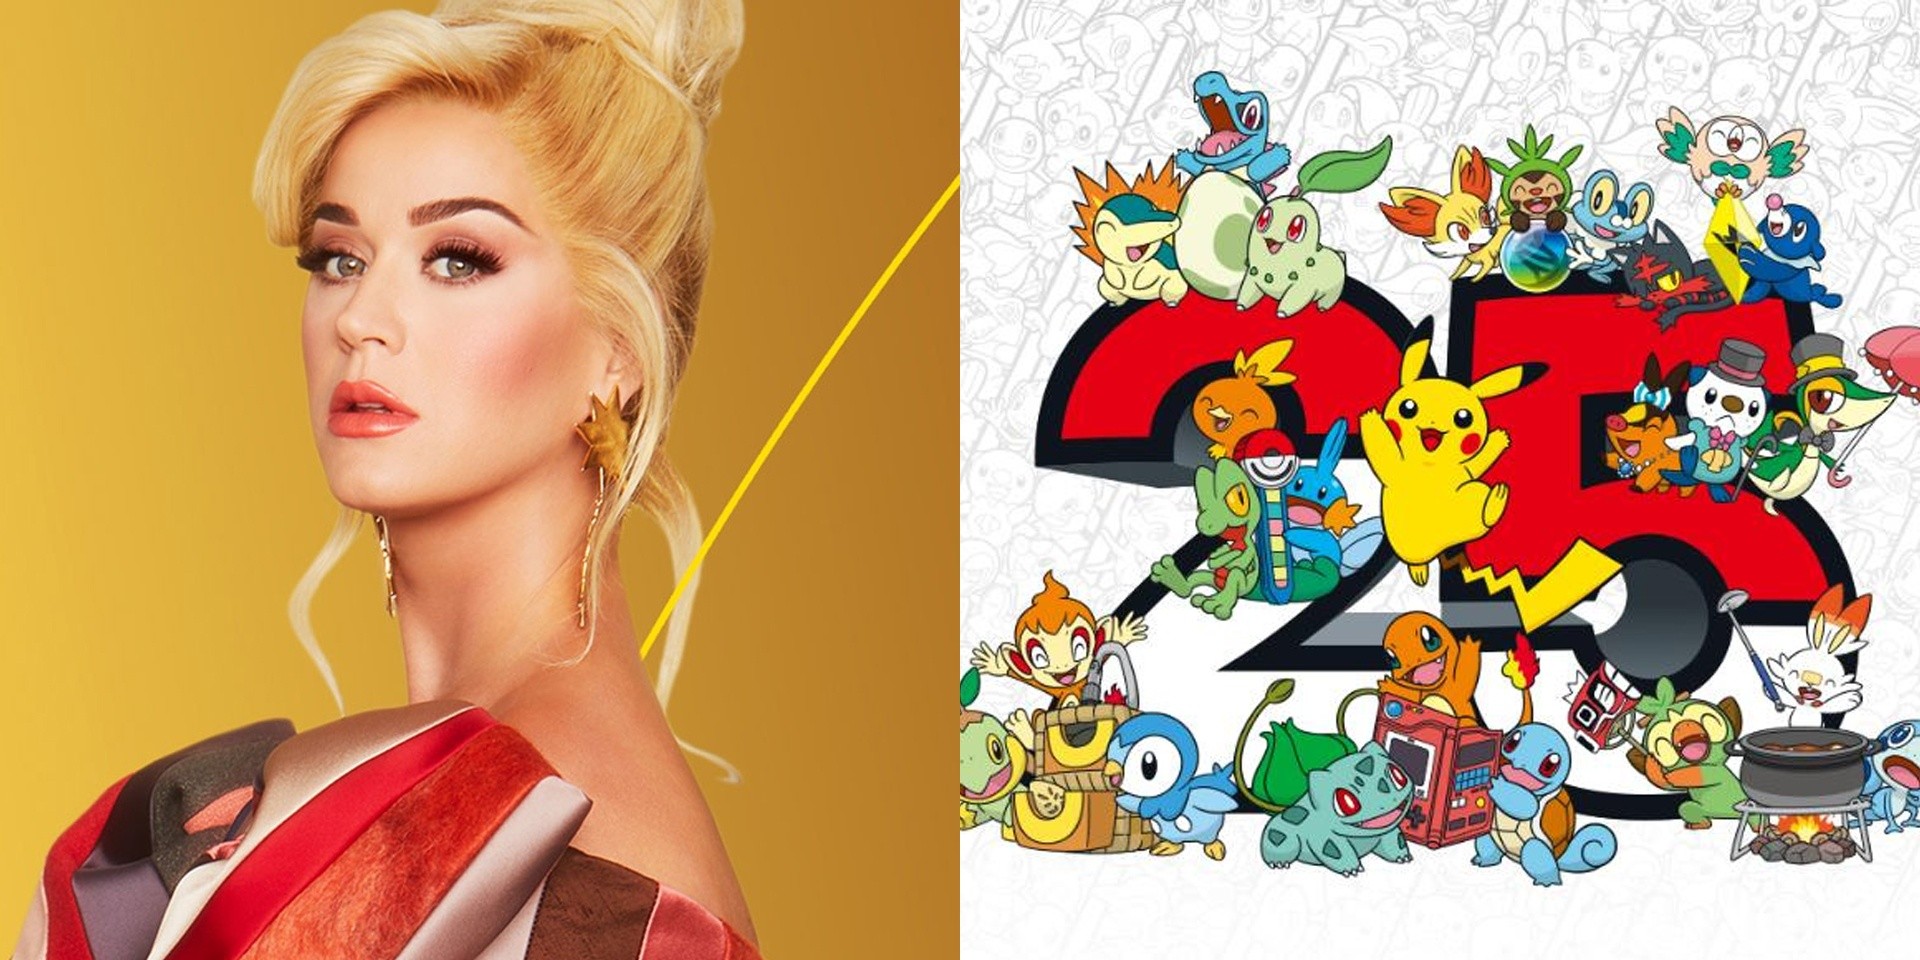 Pokémon to celebrate its 25th anniversary with global music event P25 Music featuring Katy Perry, new games, exclusive merch, and more